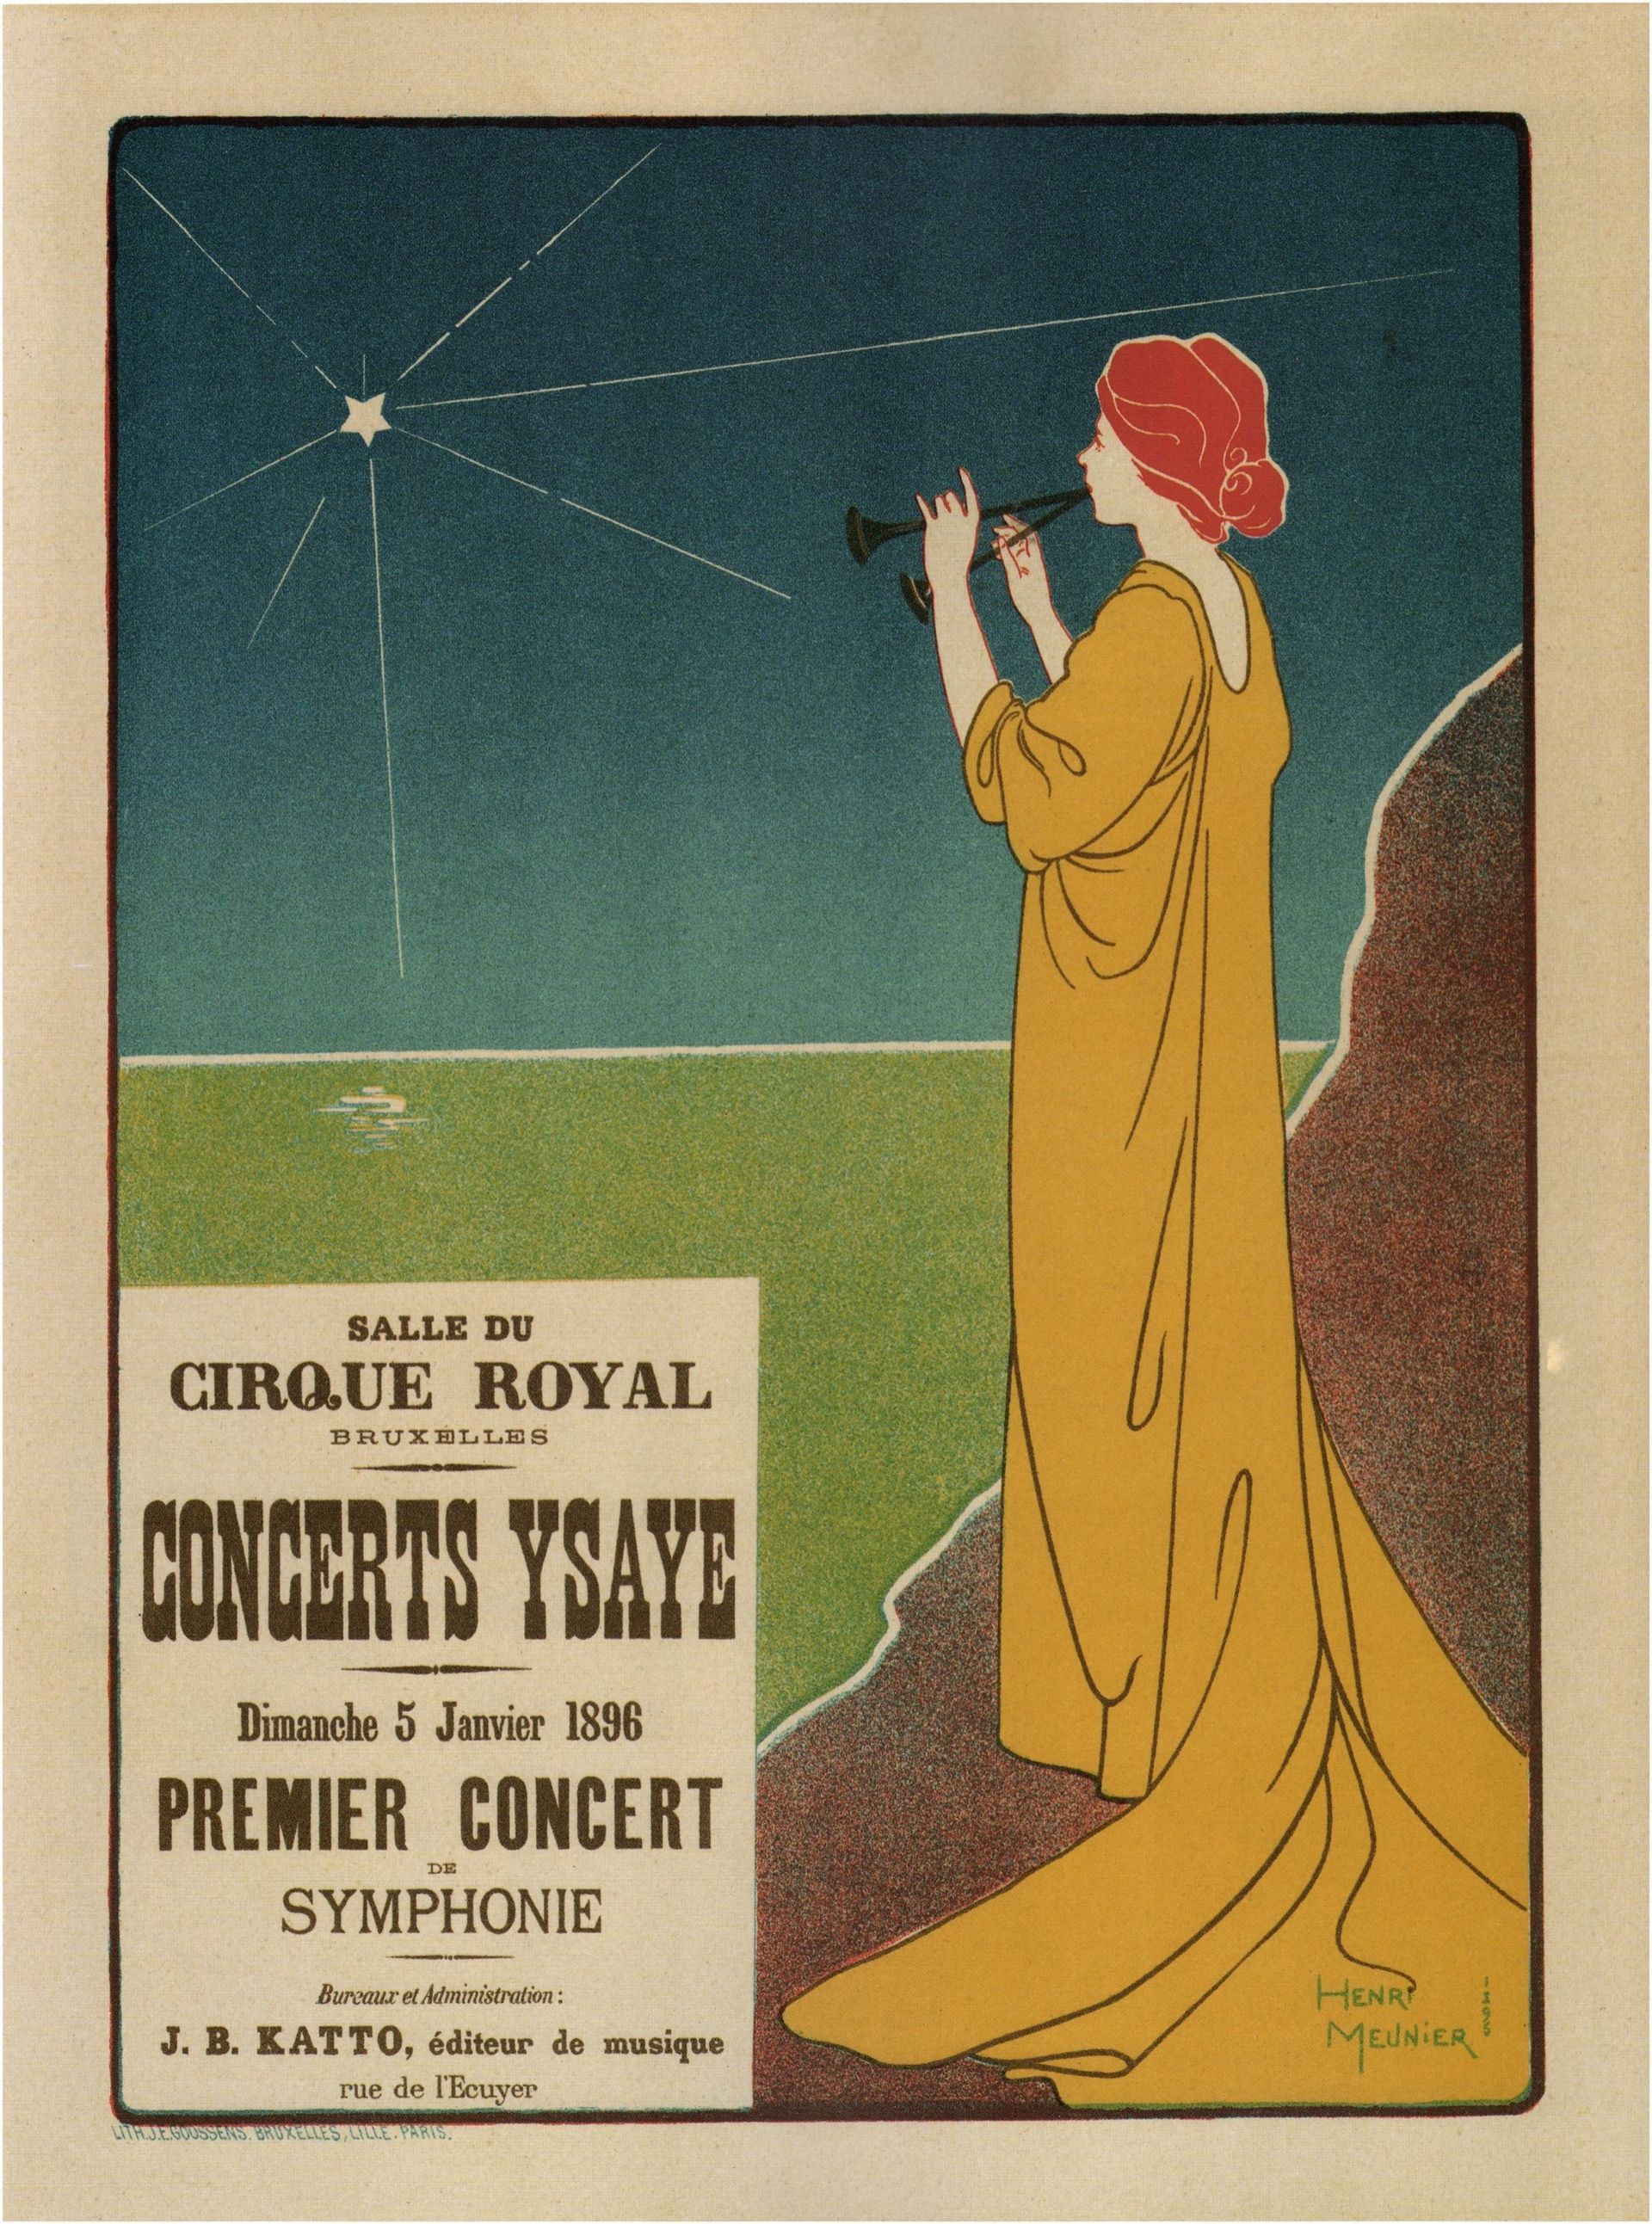 Concerts Ysae, 1895. From a private collection.